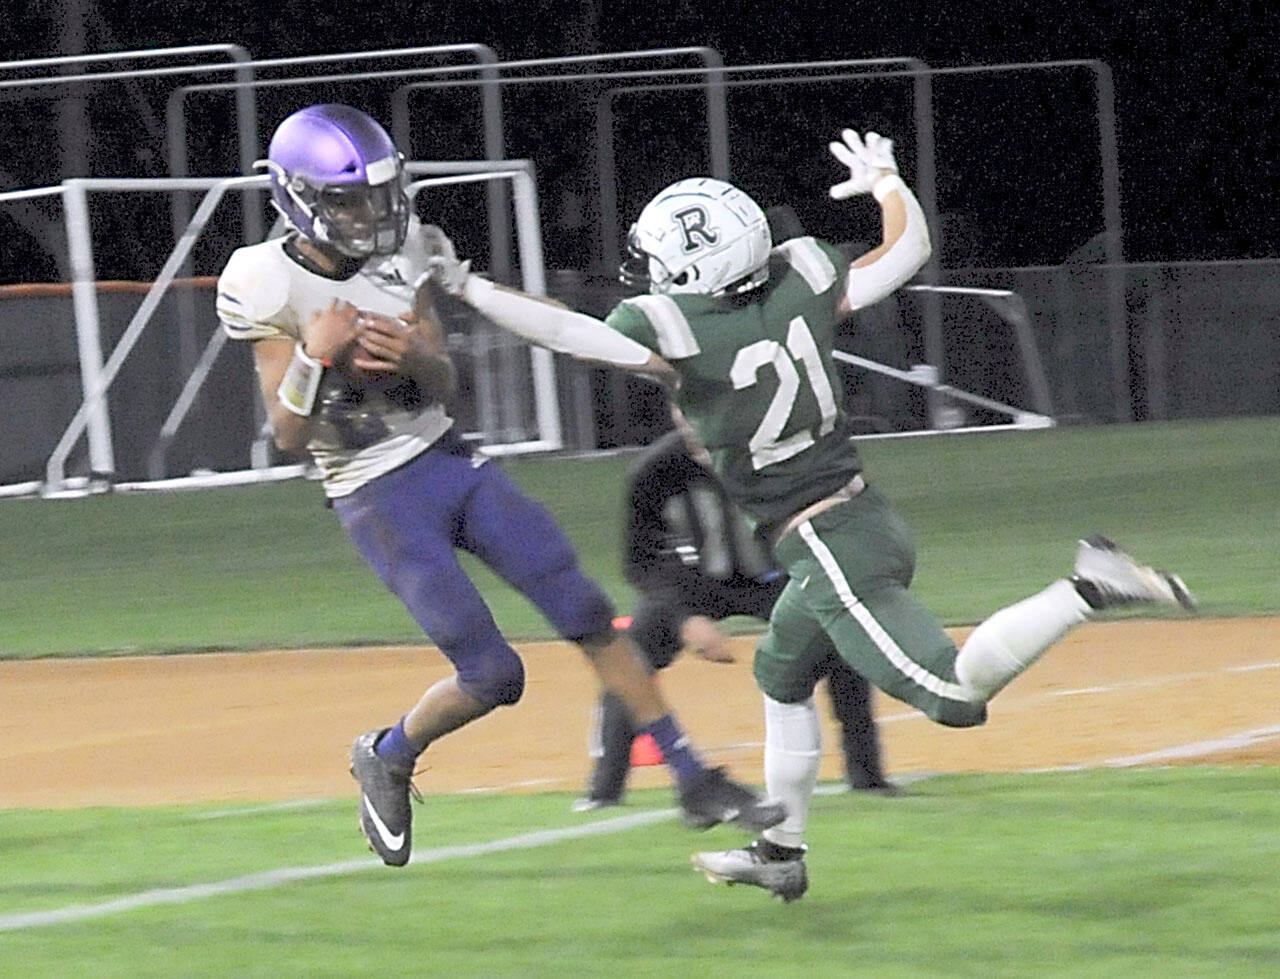 Sequim’s Toppy Robideau, left, makes an end-zone reception over the defense of Port Angeles’ Tanner Jacobsen in the closing seconds of the fourth quarter to put the Wolves over the Roughriders on Friday night in Port Angeles. (Keith Thorpe/Peninsula Daily News)